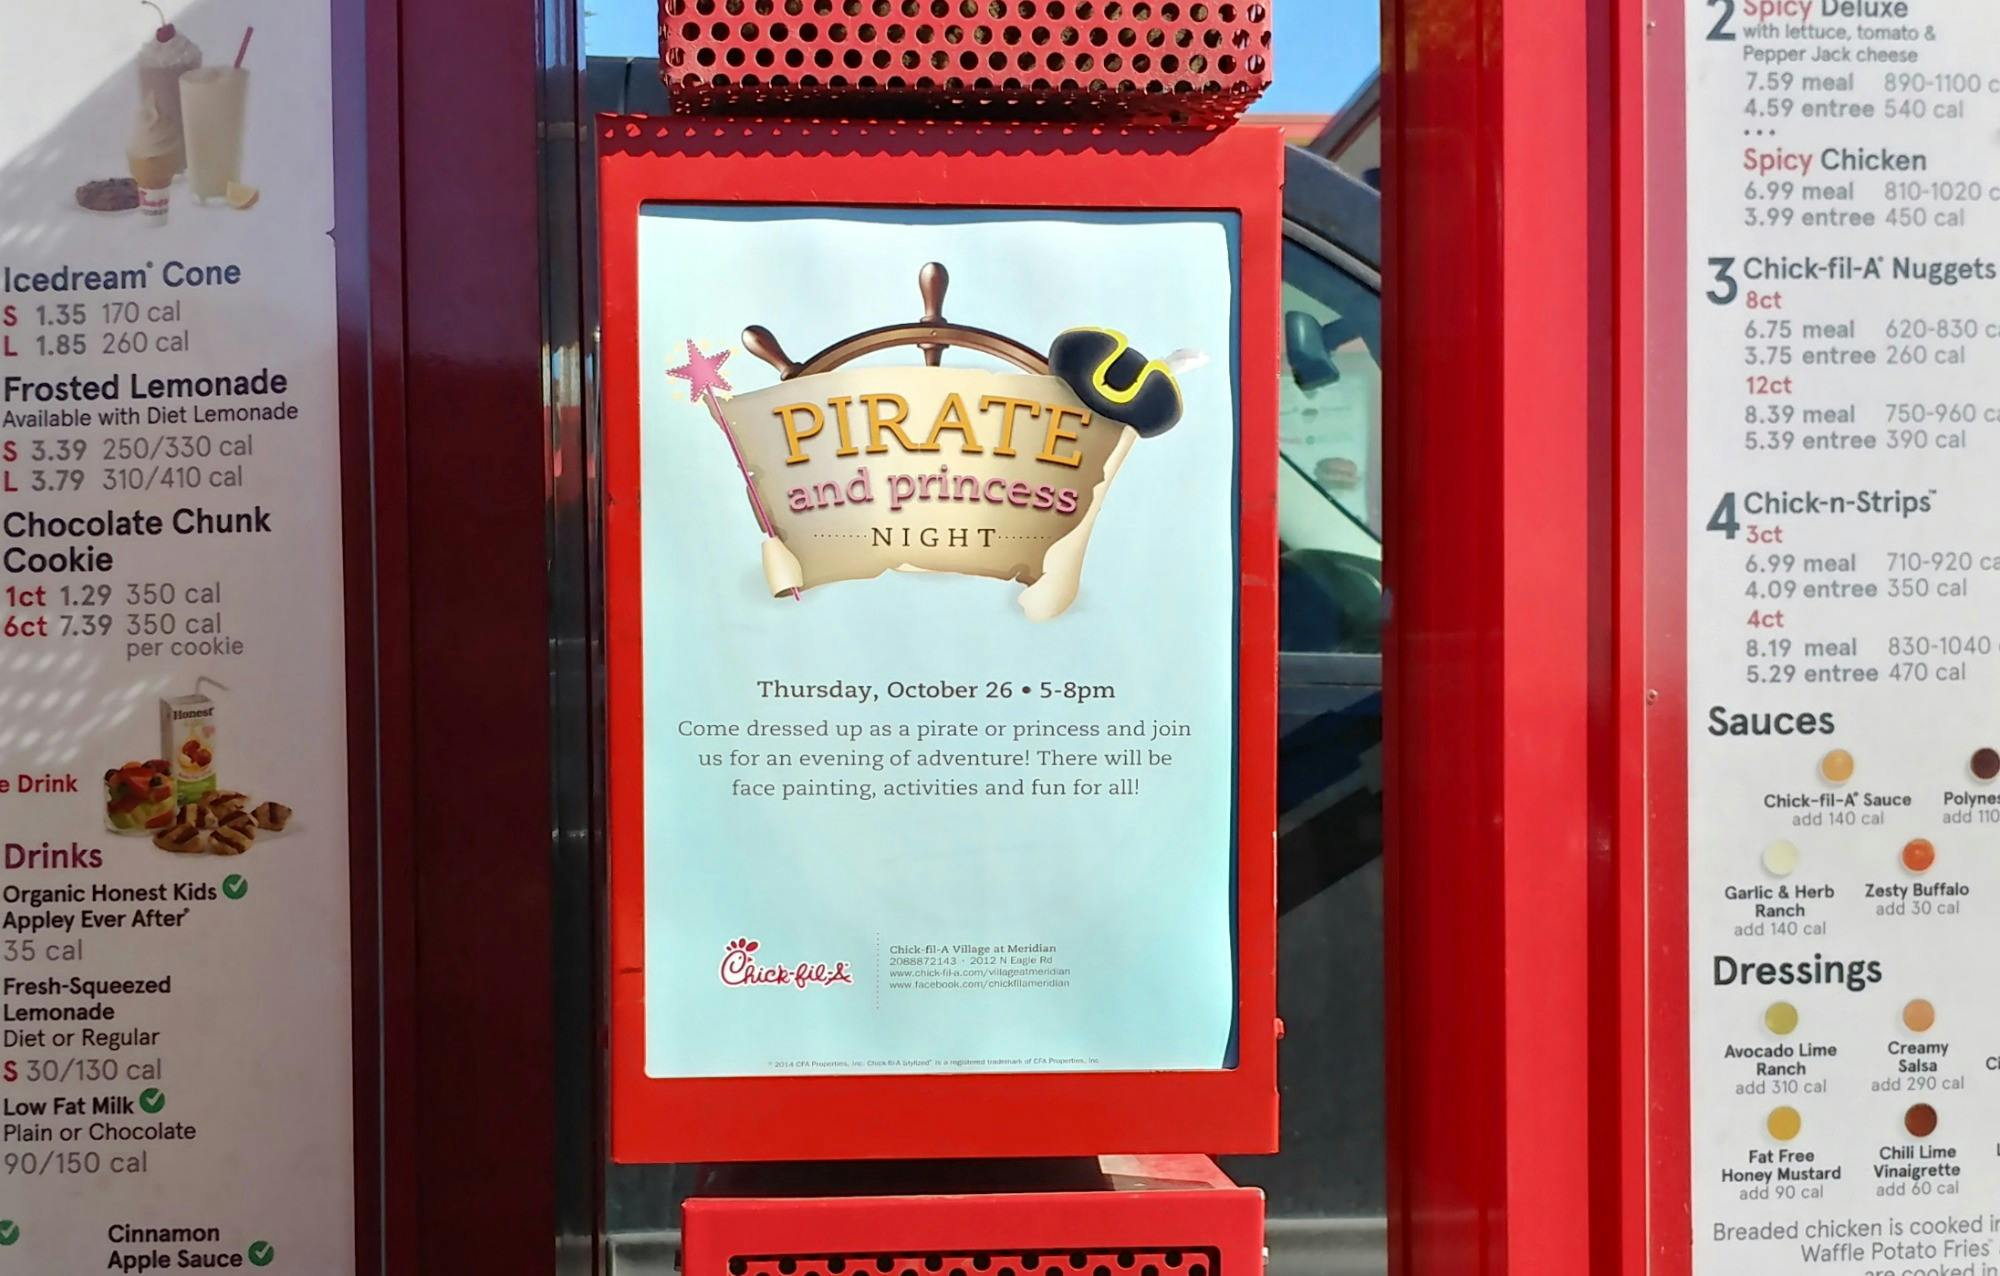 A sign advertising Pirate and Princess Night at Chick-fil-A displayed by the drive-thru menu.